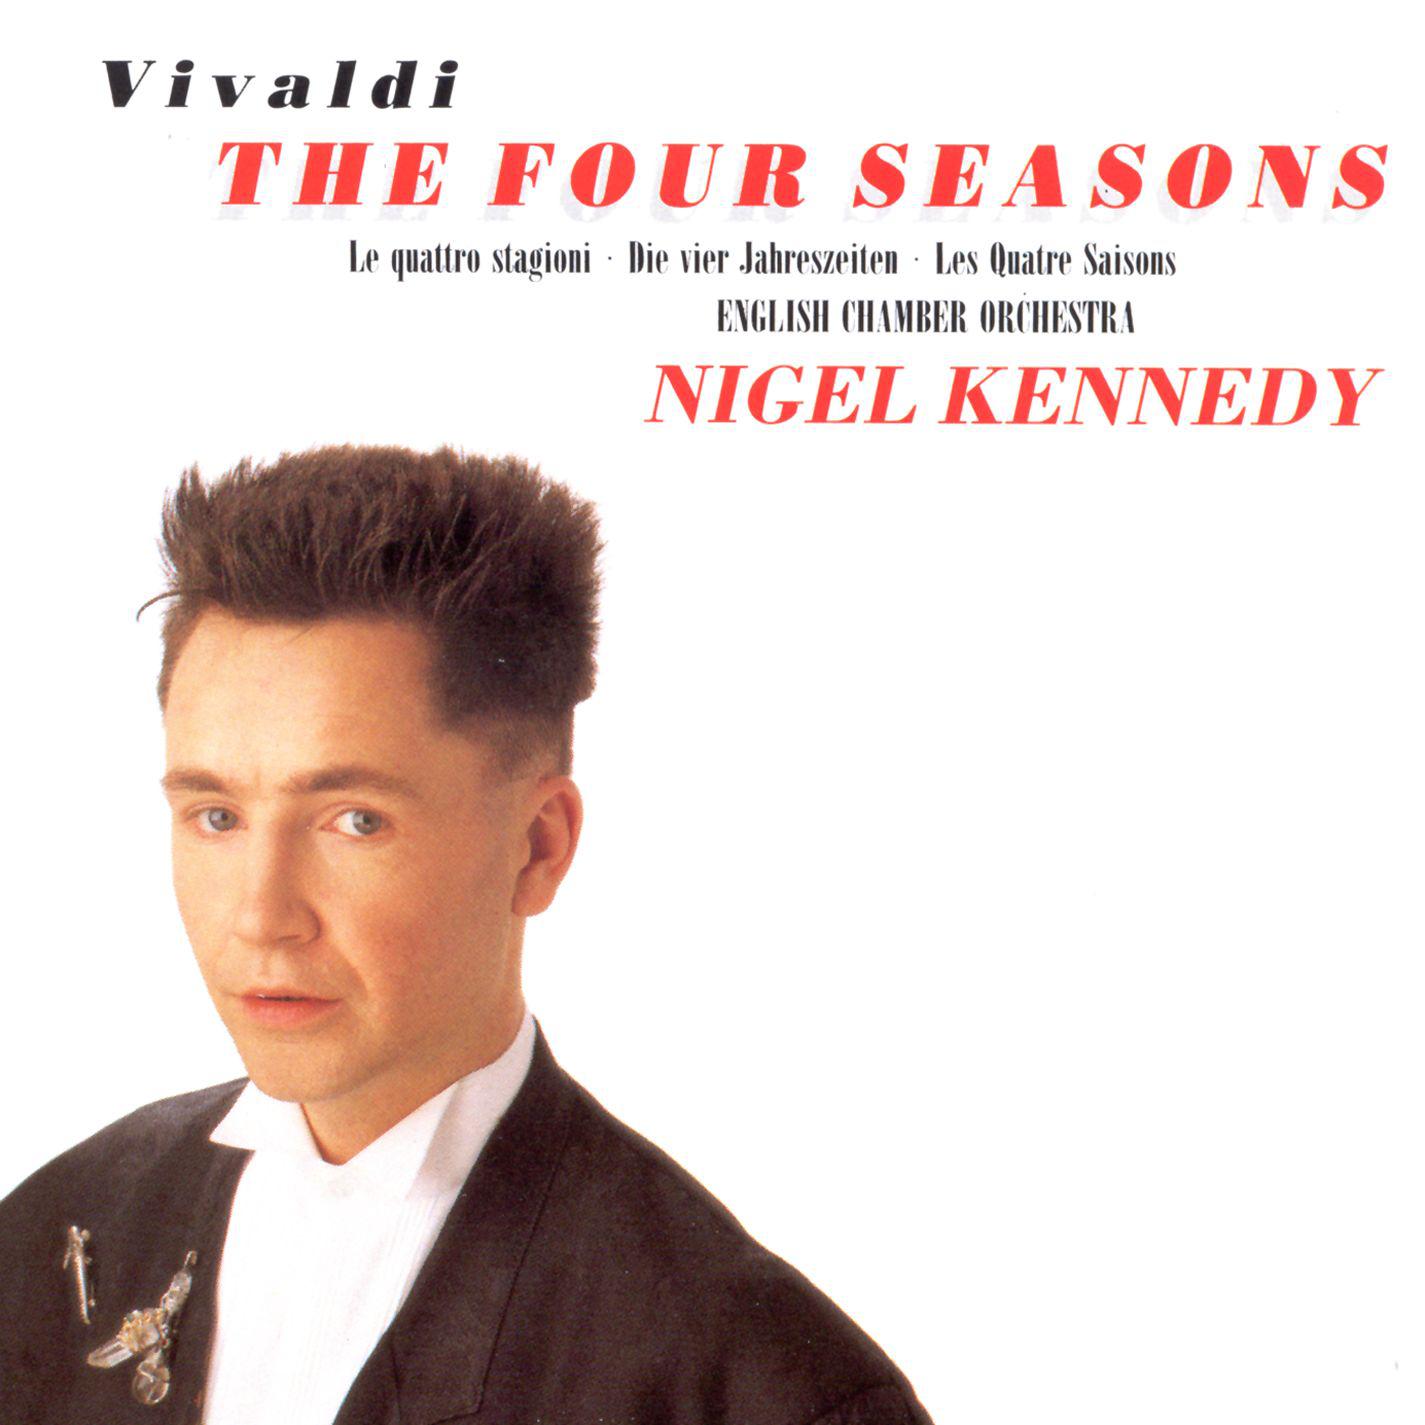 English Chamber Orchestra - The Four Seasons, Violin Concerto in F Major, Op. 8 No. 3, RV 293 